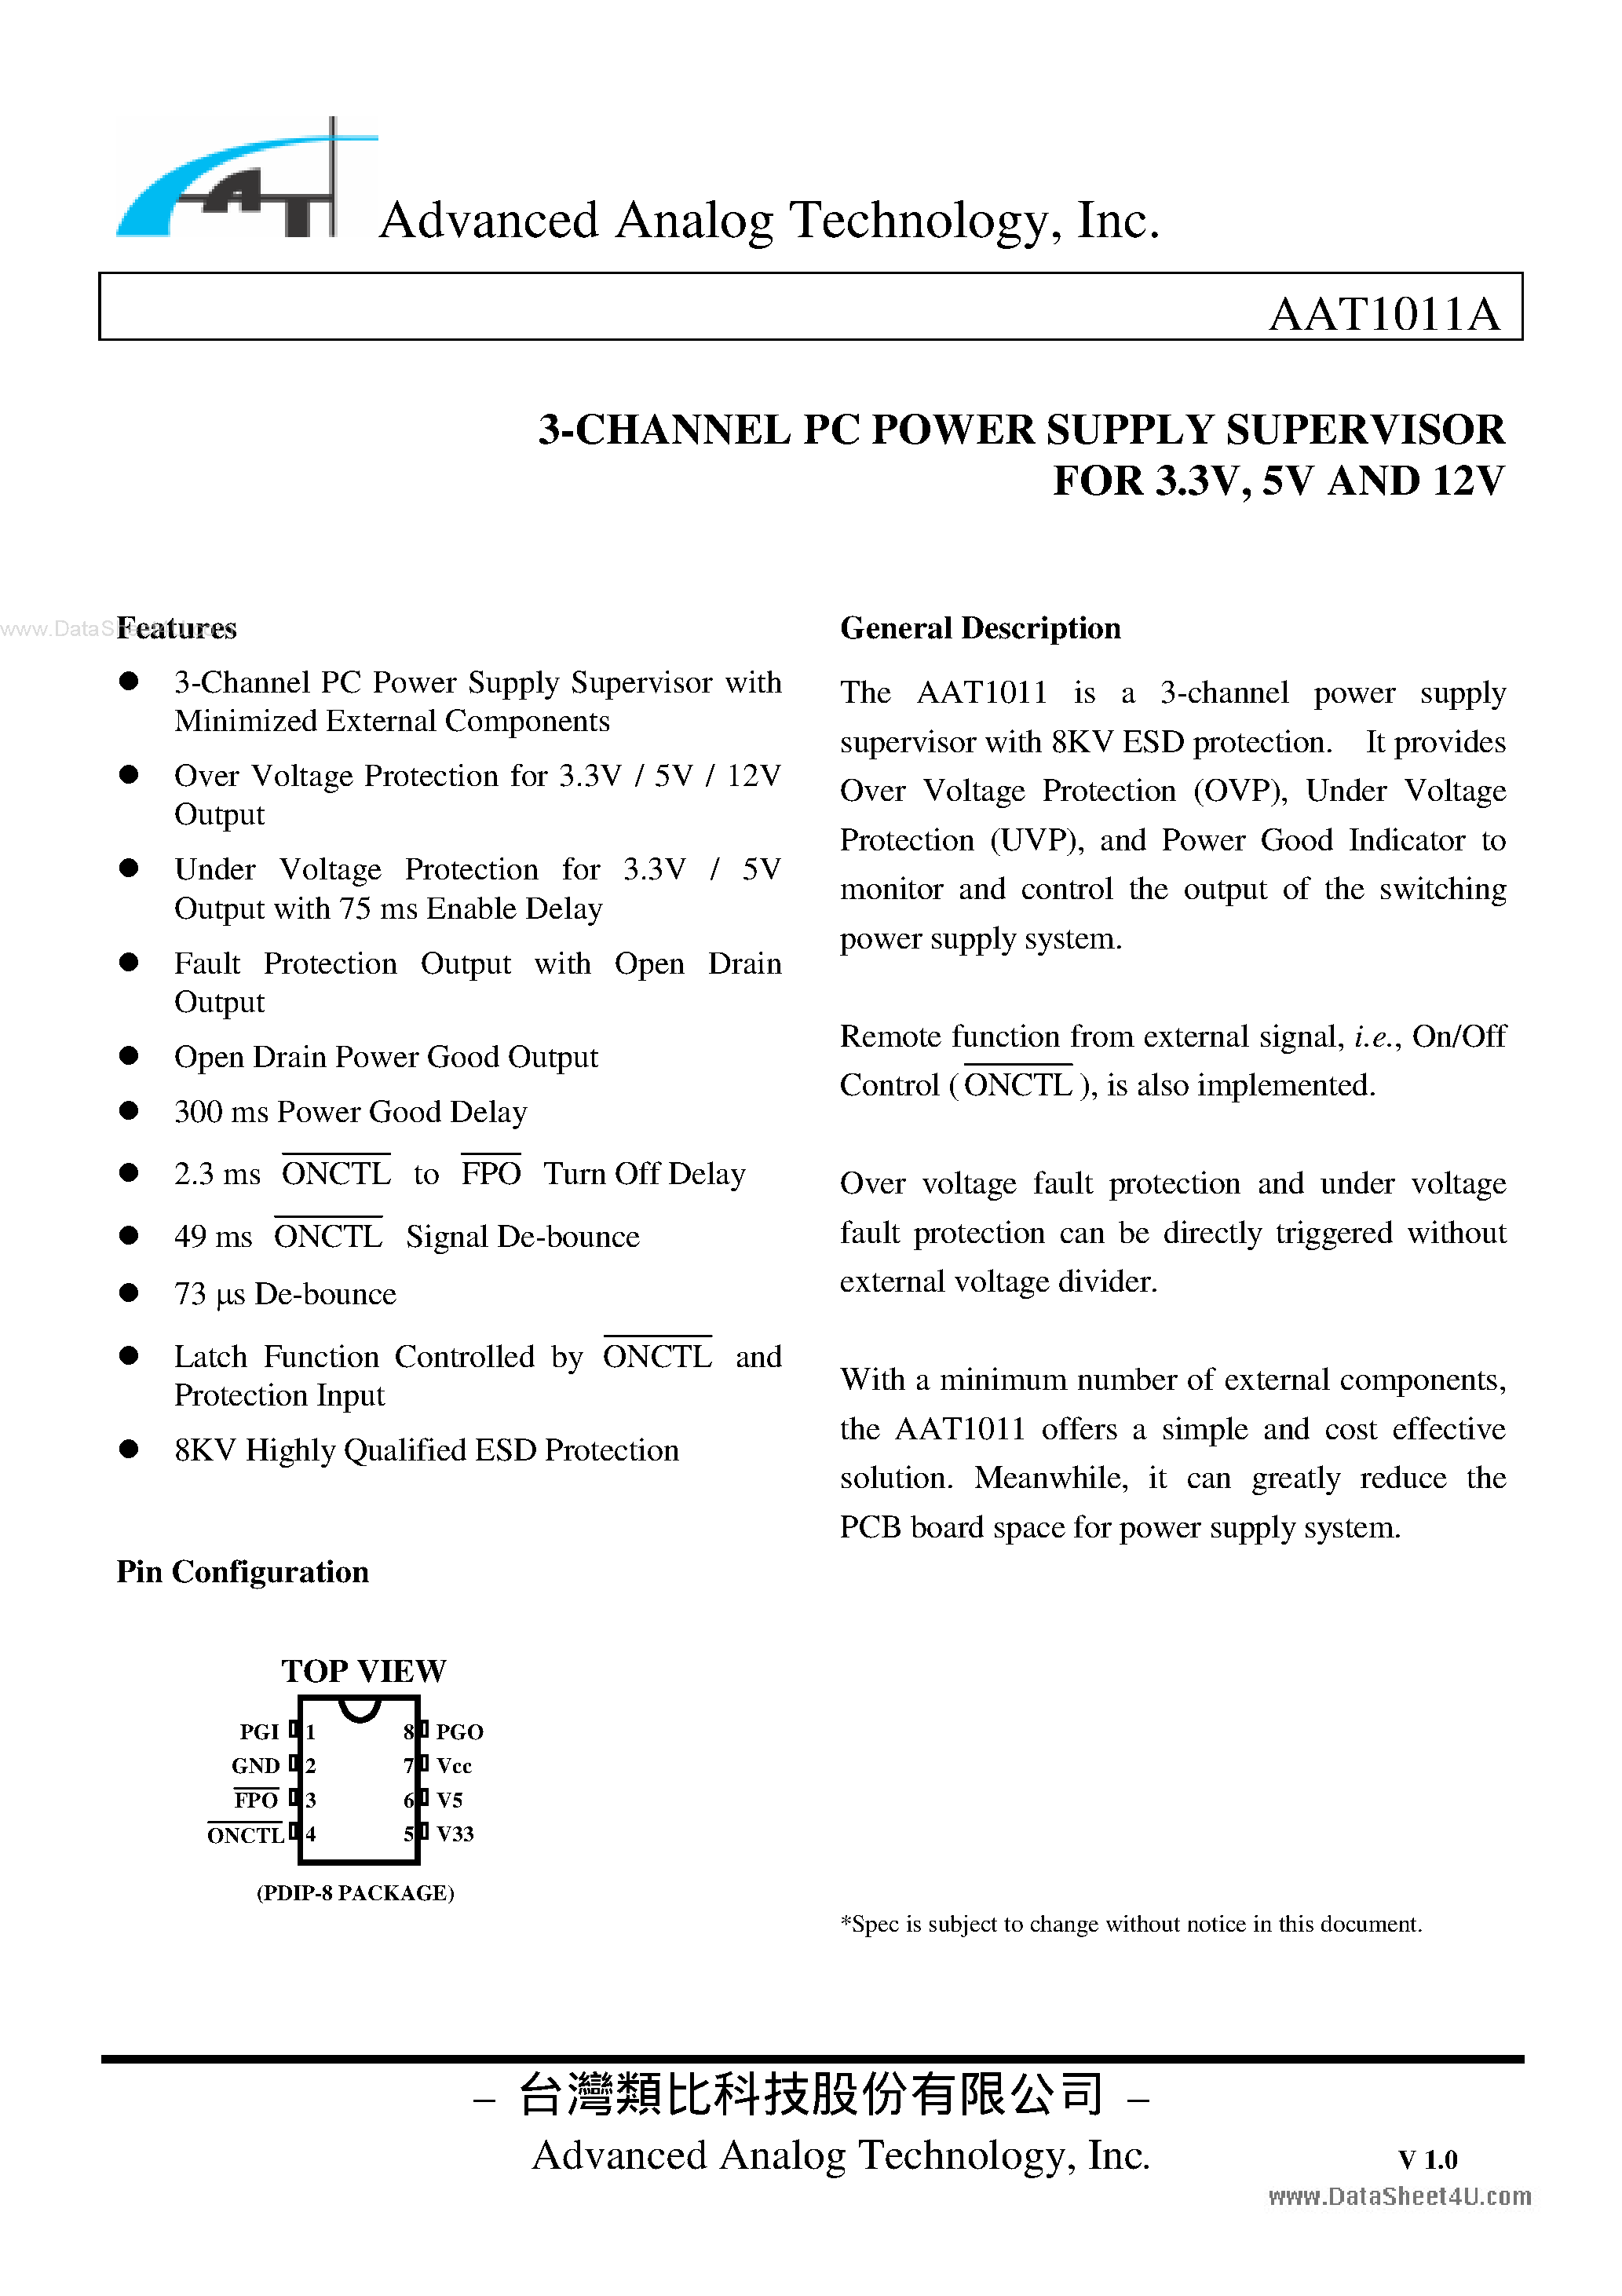 Datasheet AAT1011A - 3-CHANNEL PC POWER SUPPLY SUPERVISOR page 1